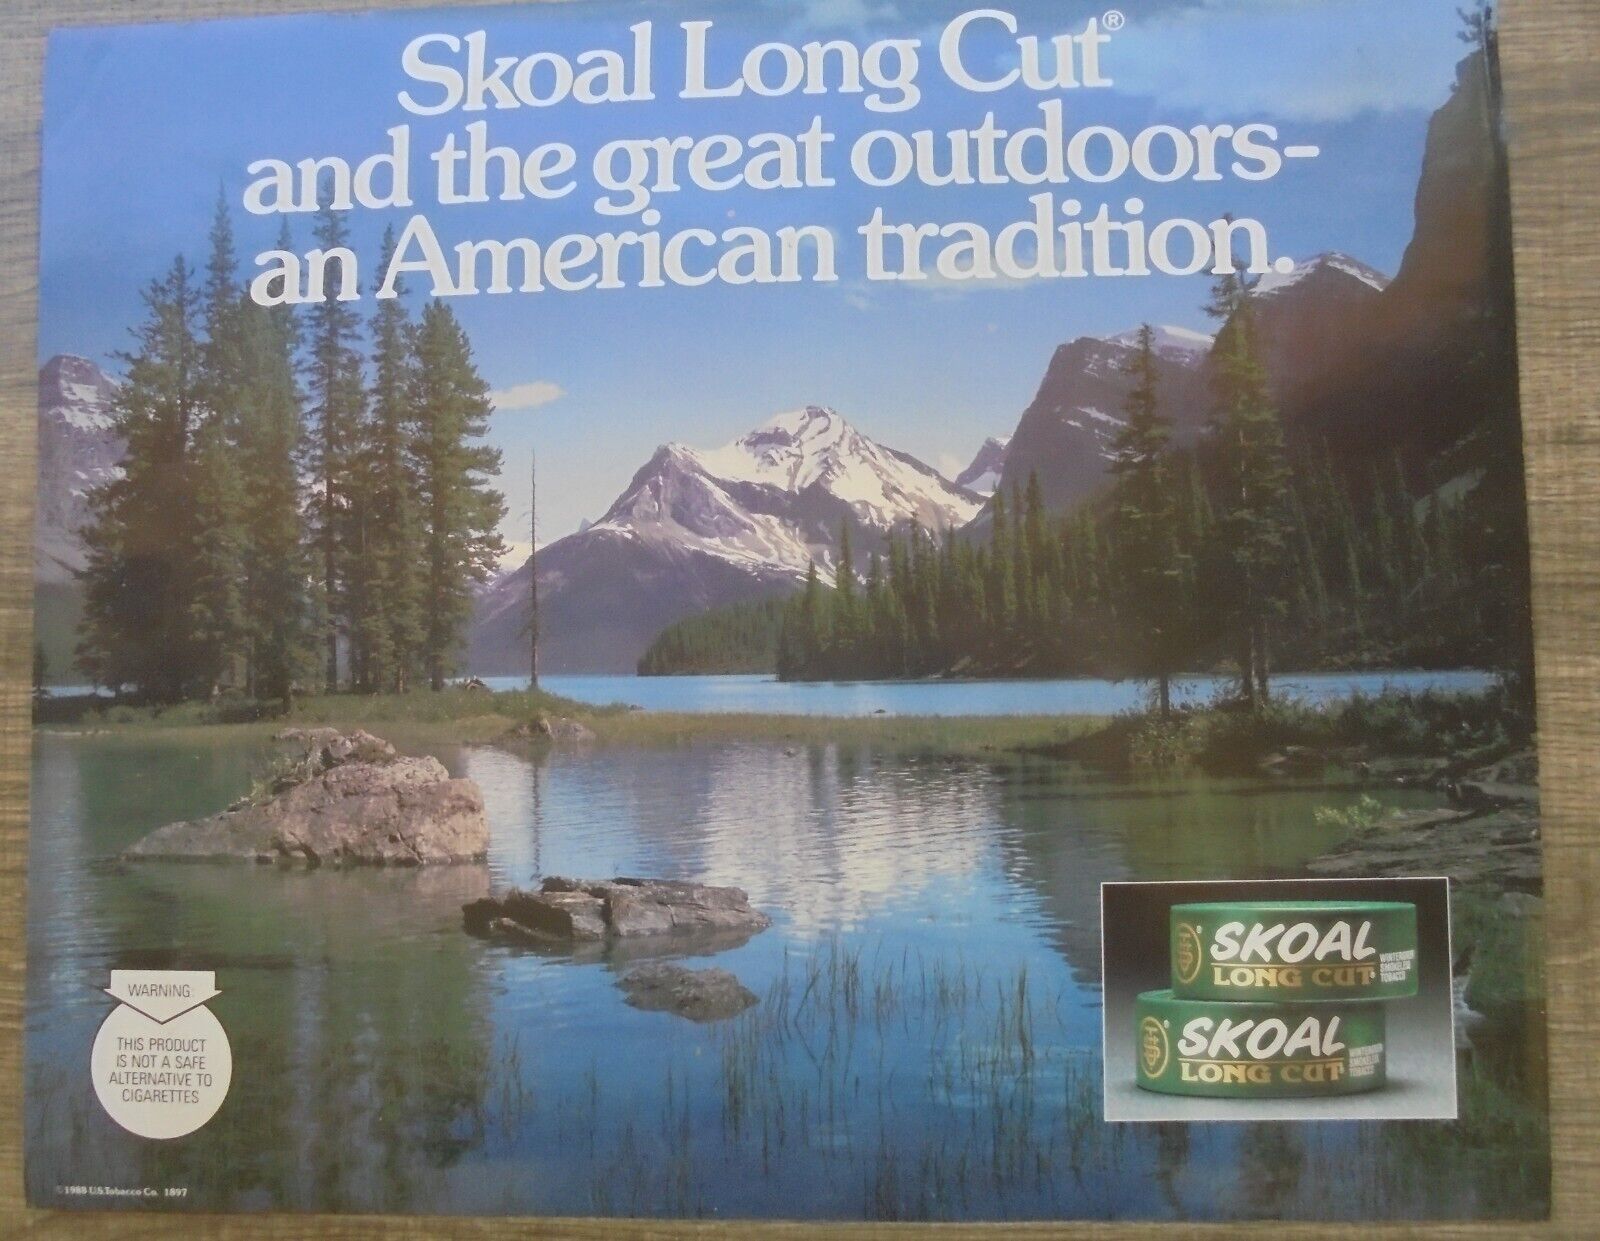 SKOAL LONG CUT THE GREAT OUTDOORS-AN AMERICAN TRADITION HEAVY PAPER WINDOW SIGN